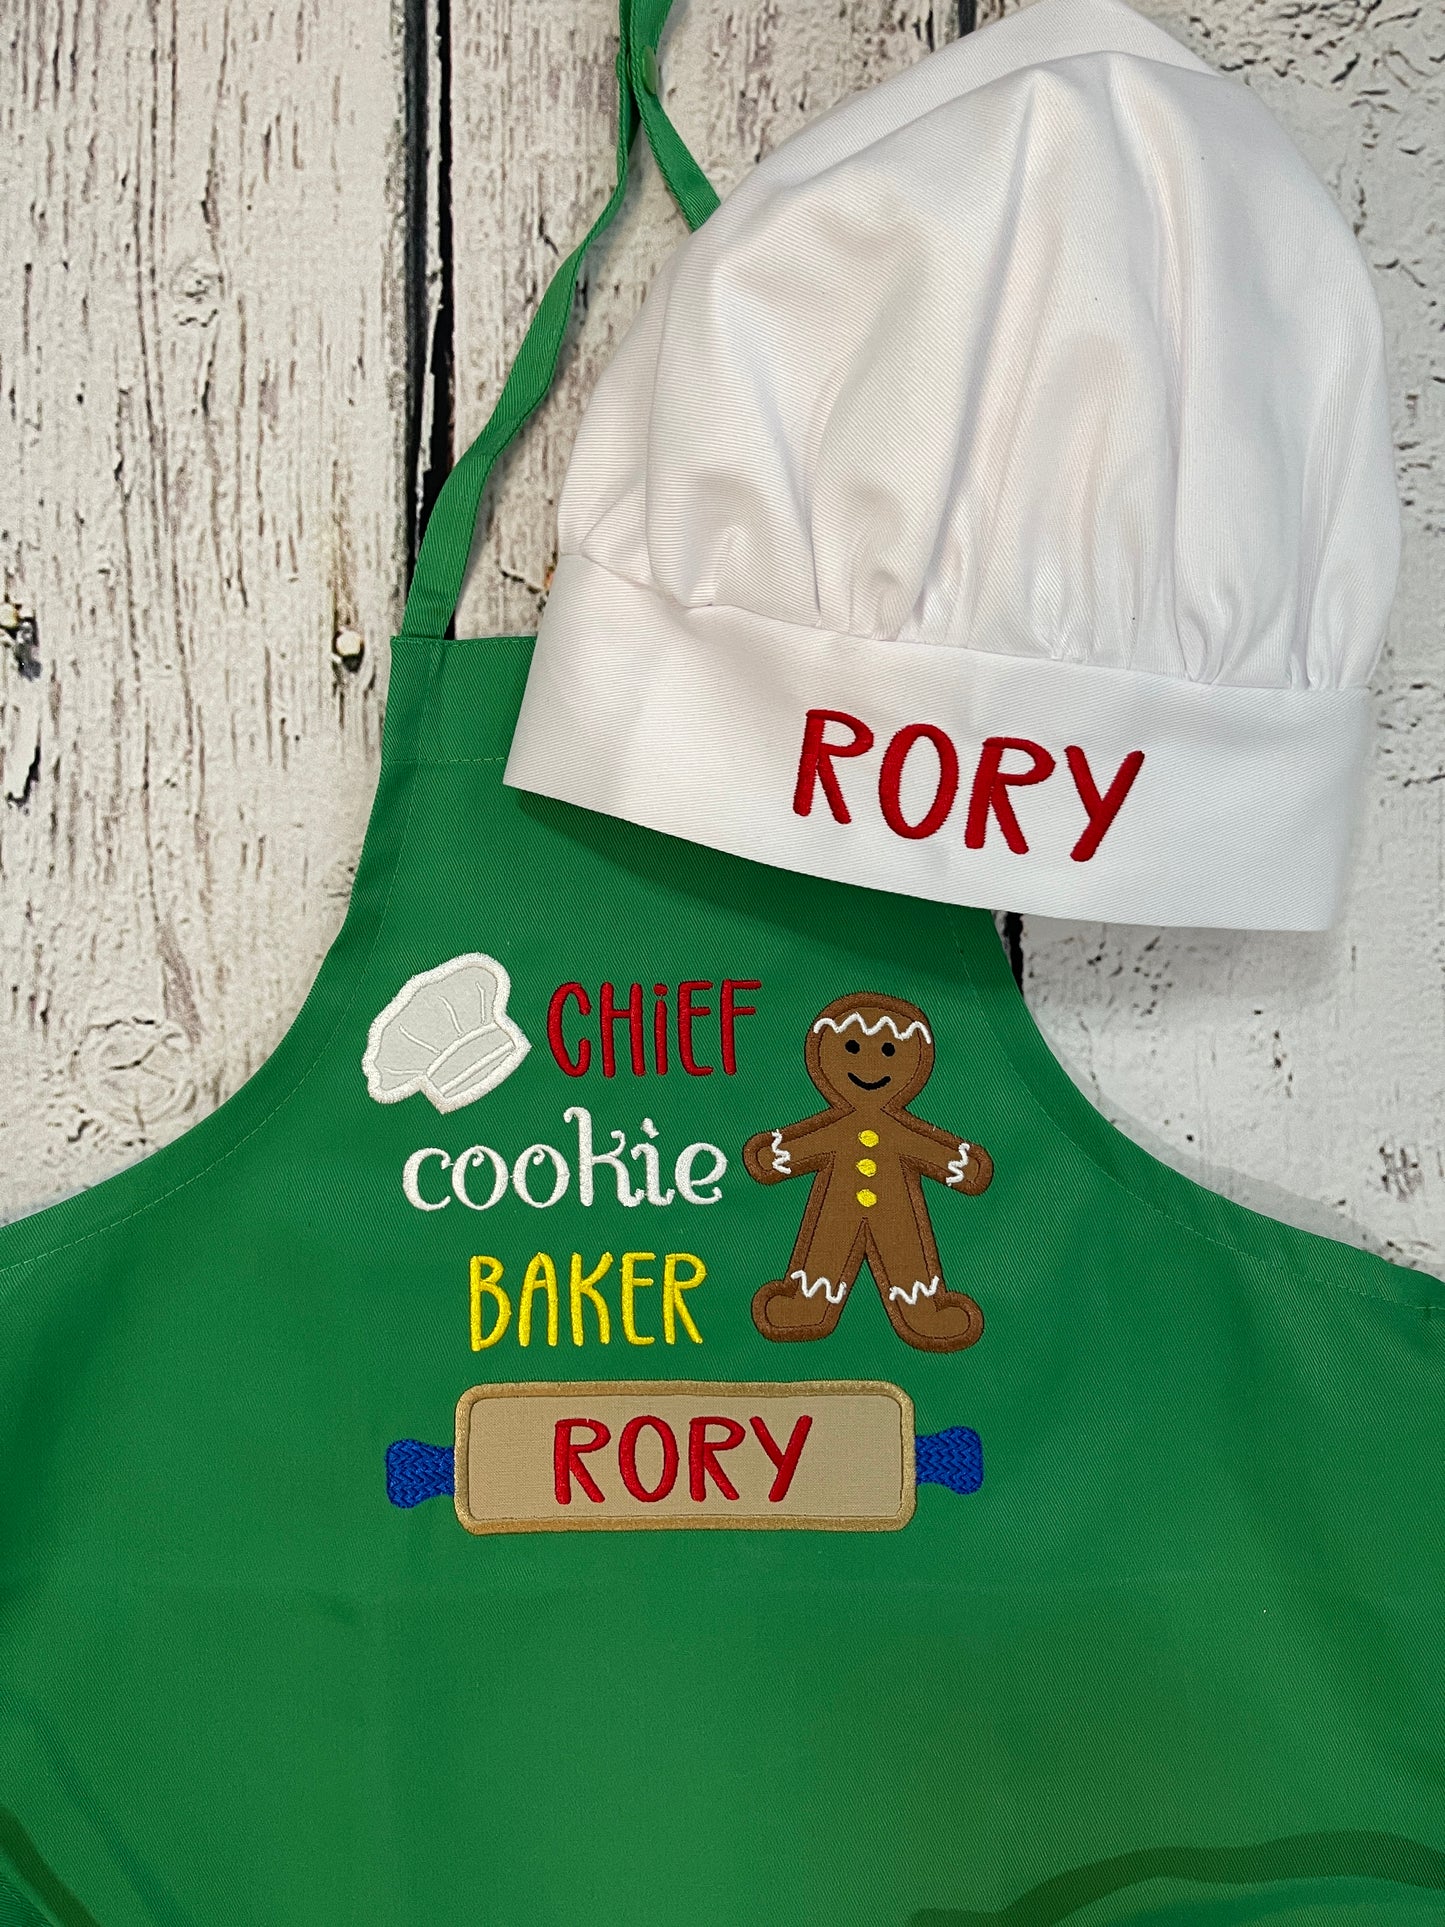 Kids Personalized Christmas Baking Apron Embroidery Chief Cookie Baker with name